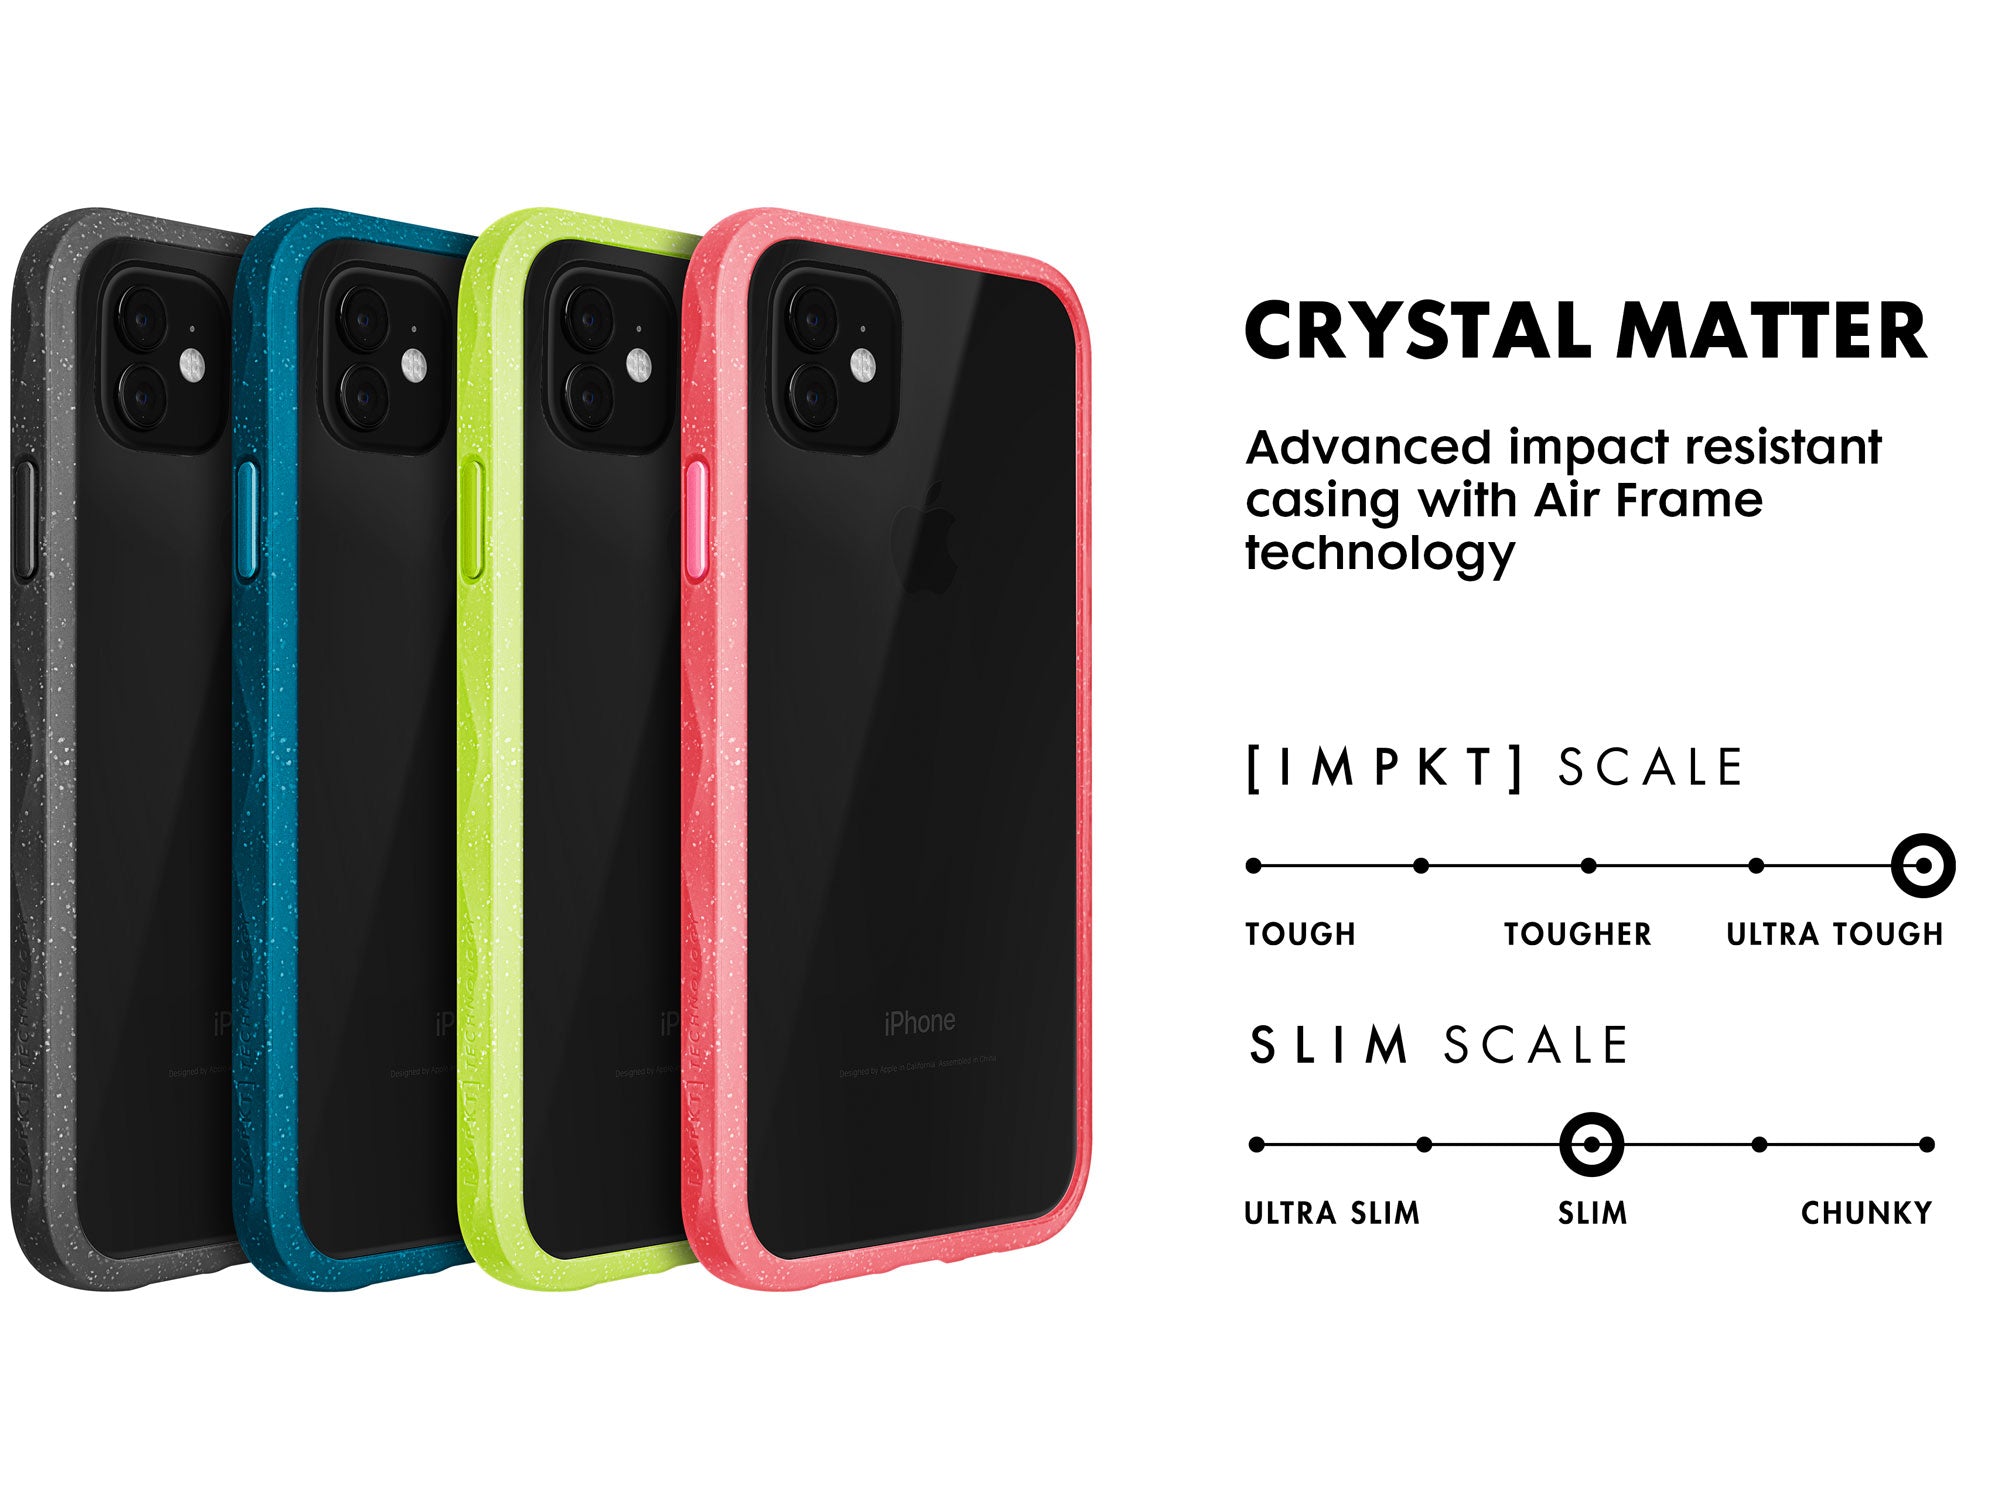 Crystal Matter for iPhone 11 series